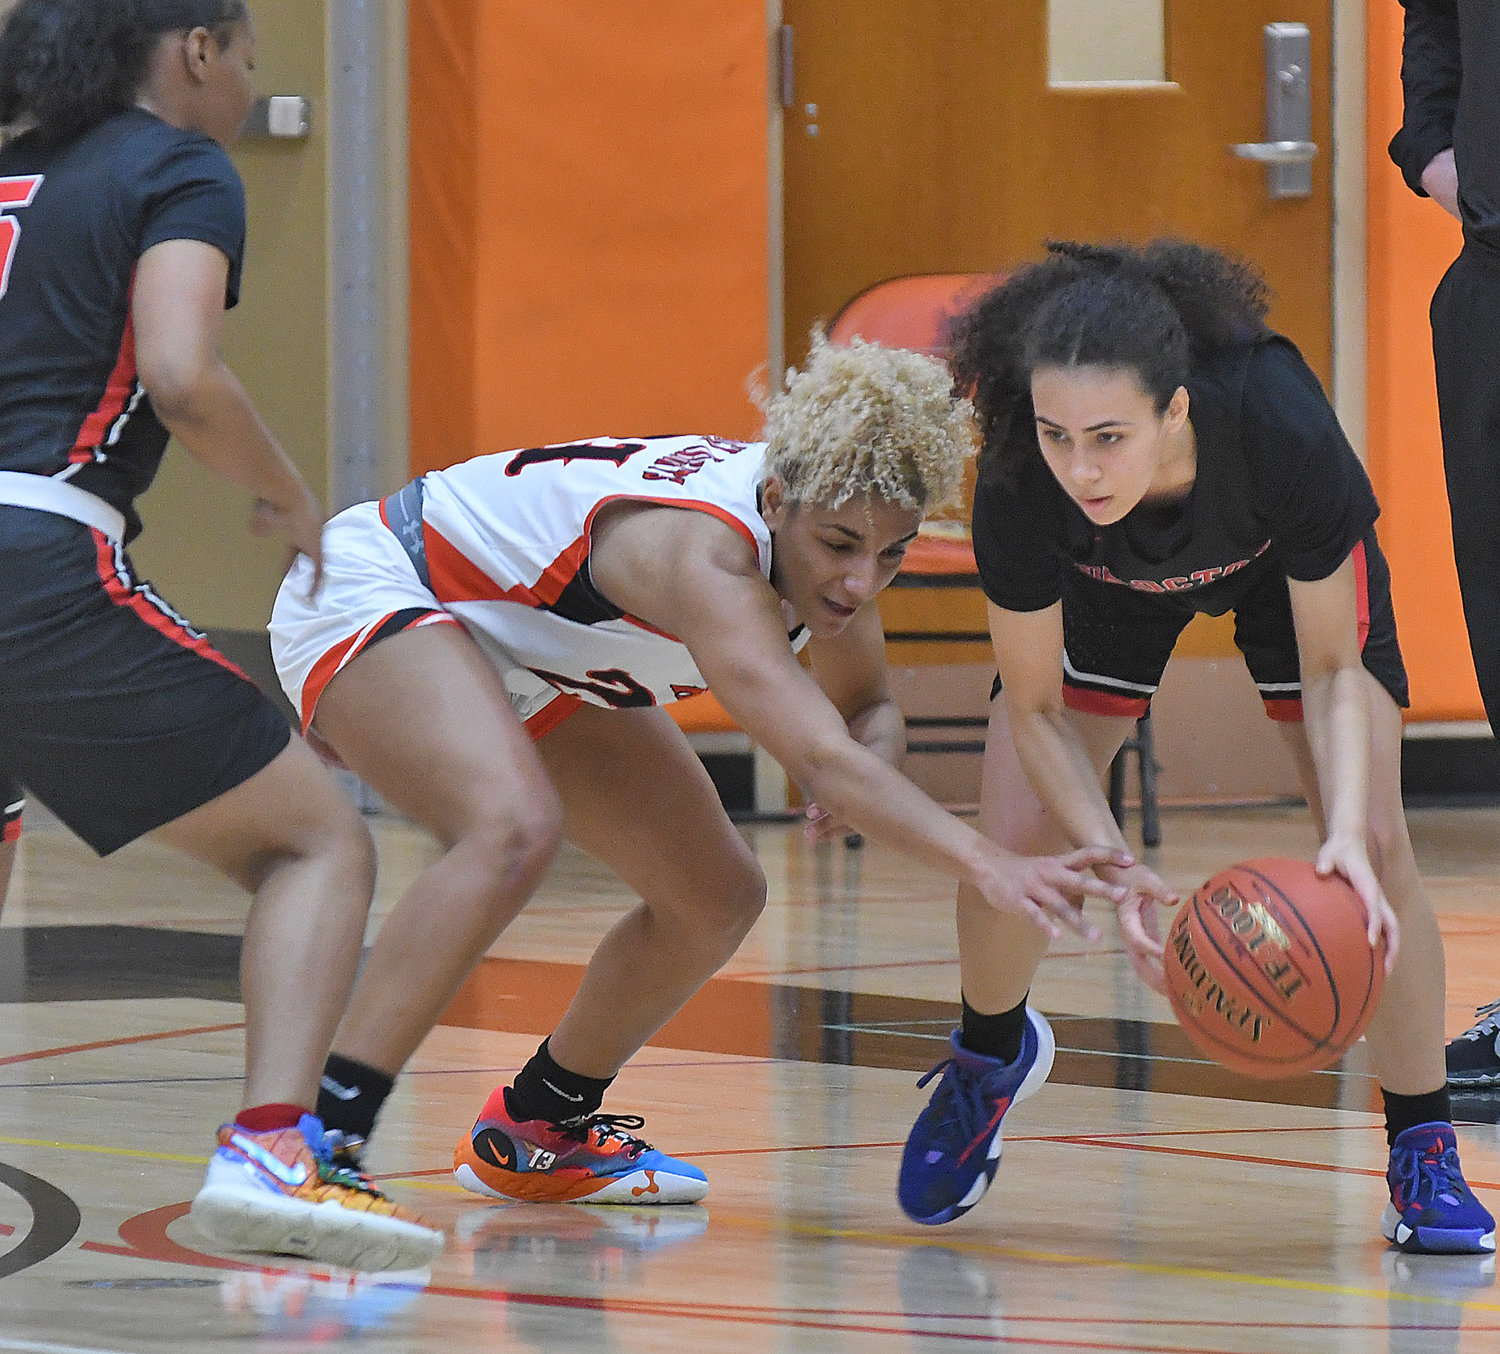 Rome Free Academy defender Amya McLeod goes for the steal against Thomas R. Proctor High’s Lleneila Rodriguez in the first quarter at RFA Saturday. On the left is Proctor’s Nyasiah Moore. McLeod scored 19 points in RFA’s 66-34 win.